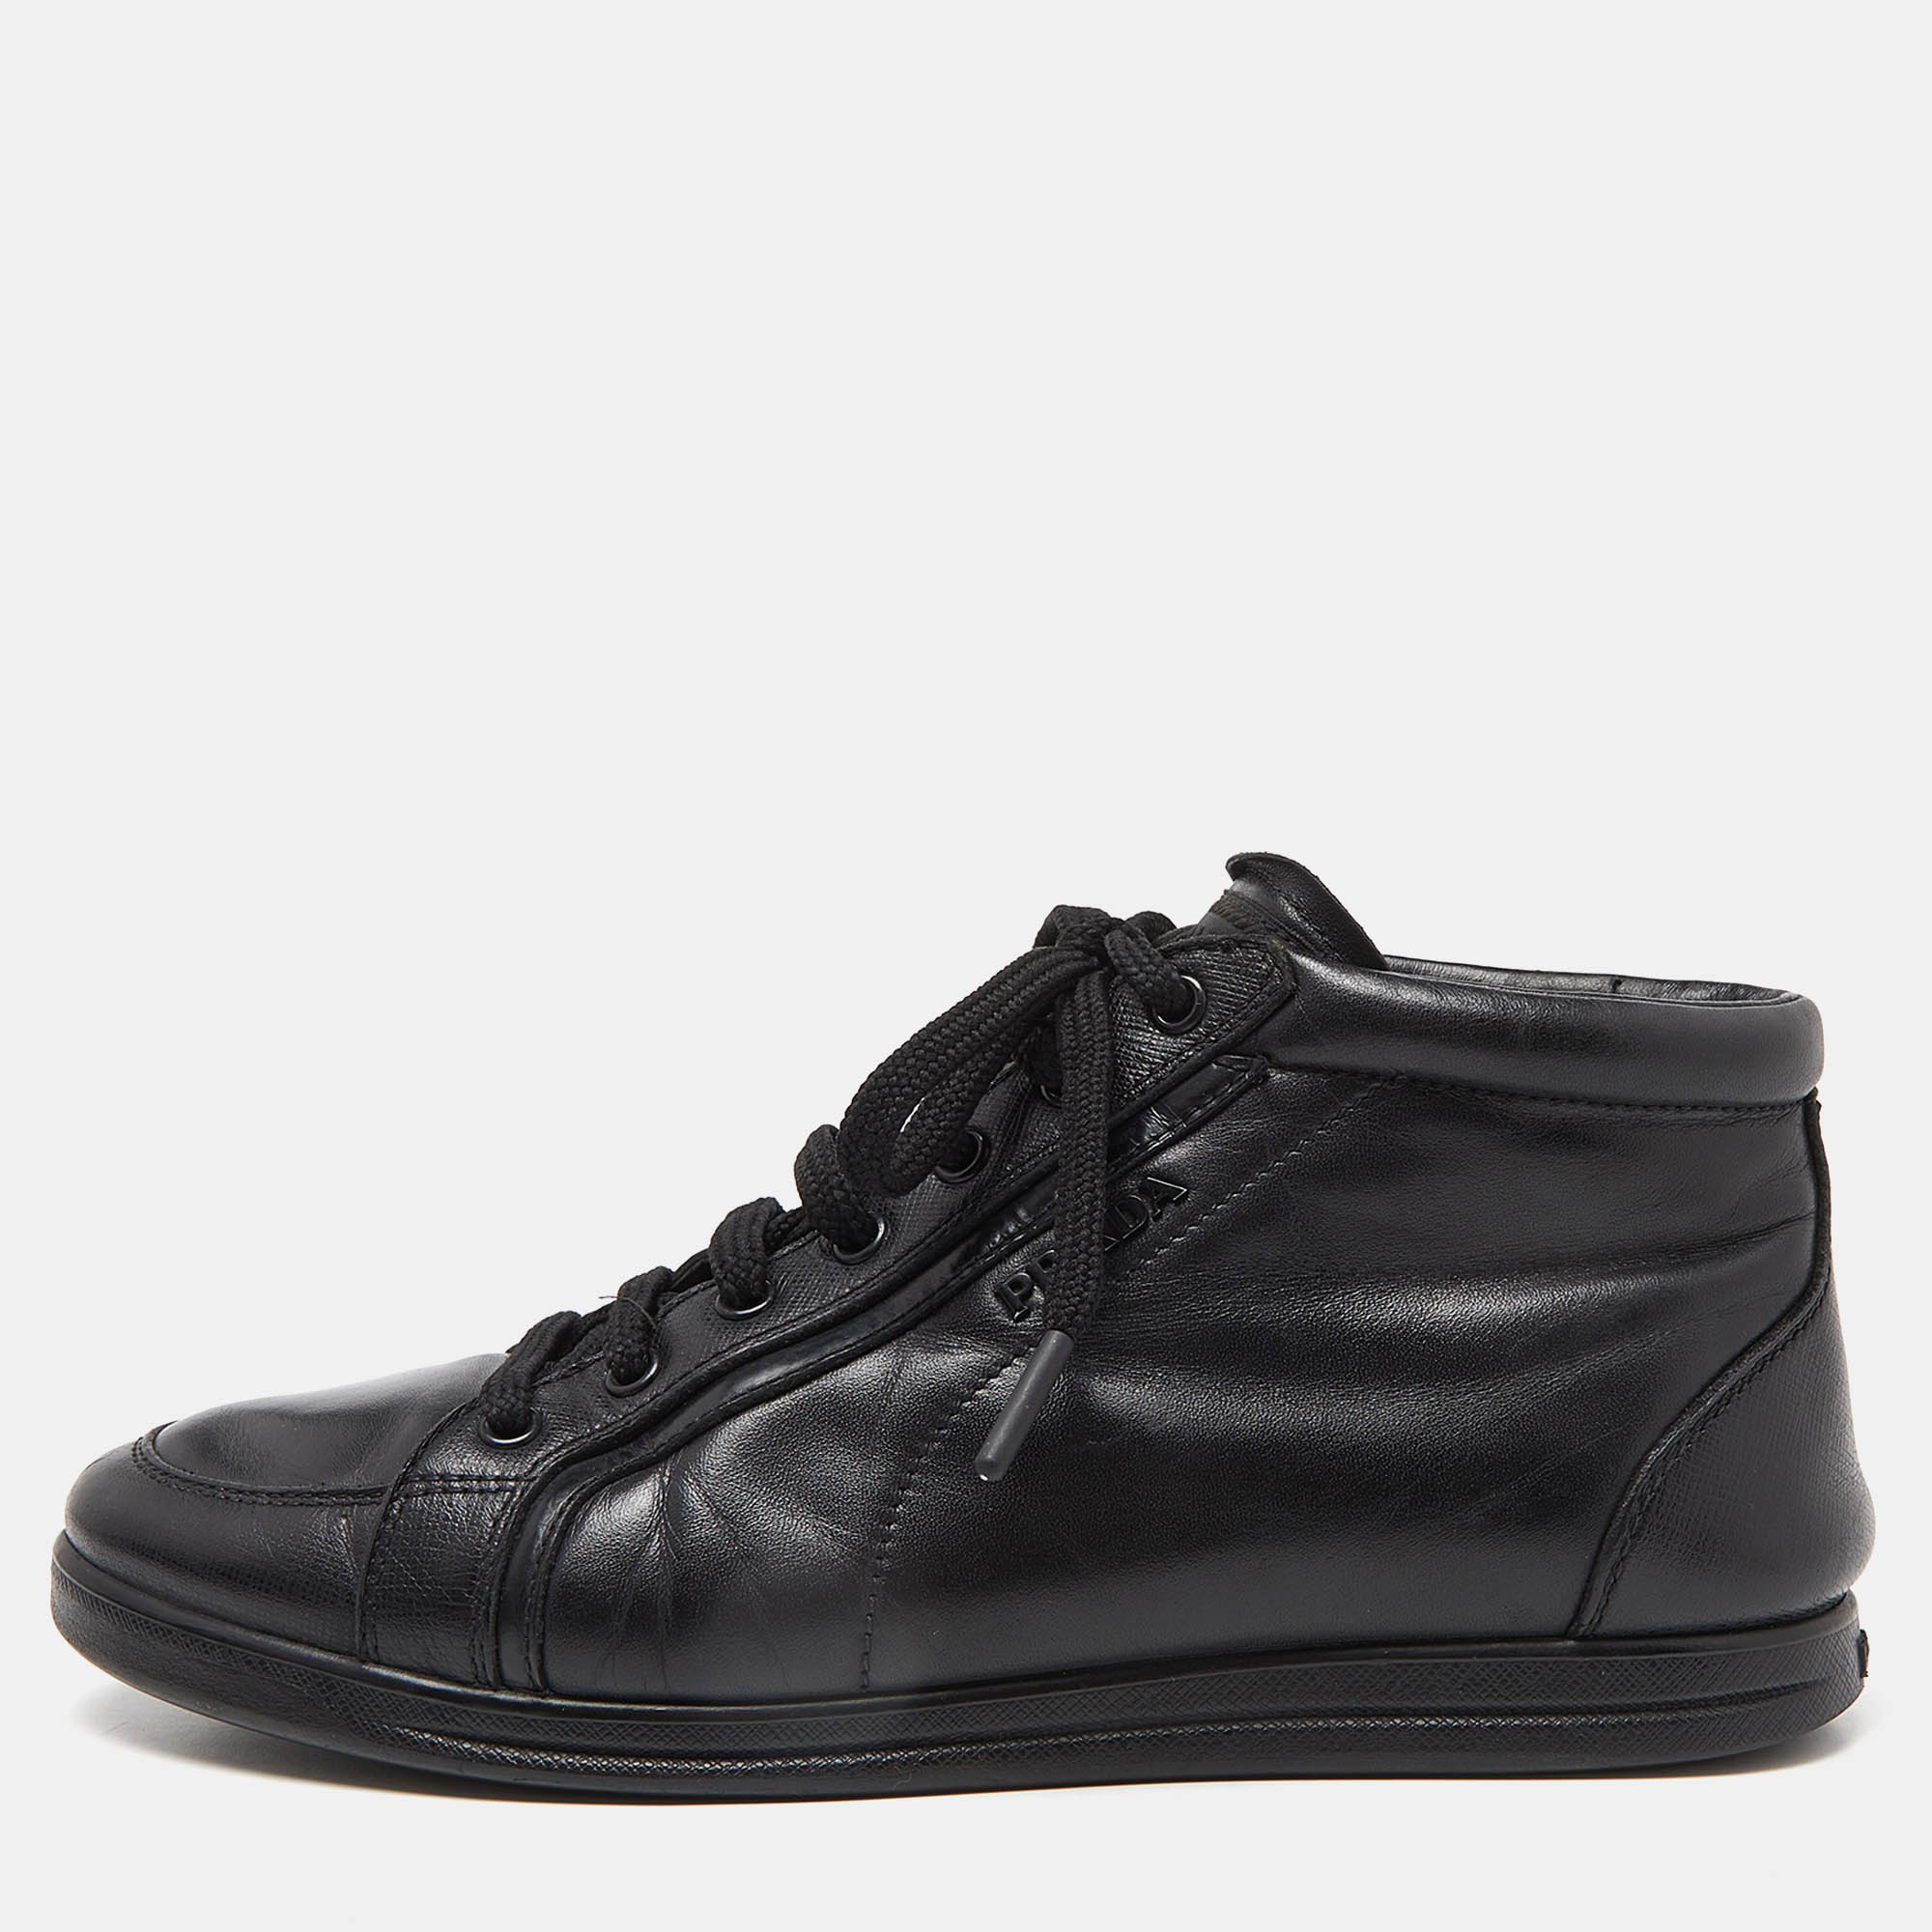 These Prada Sports sneakers are the embodiment of style and comfort. Rendered in a classic black color and crafted with leather these impressive sneakers are accented with lace ups and the brand label on the tongue. They are also graced with a stylishly put brand label on the rubber soles.